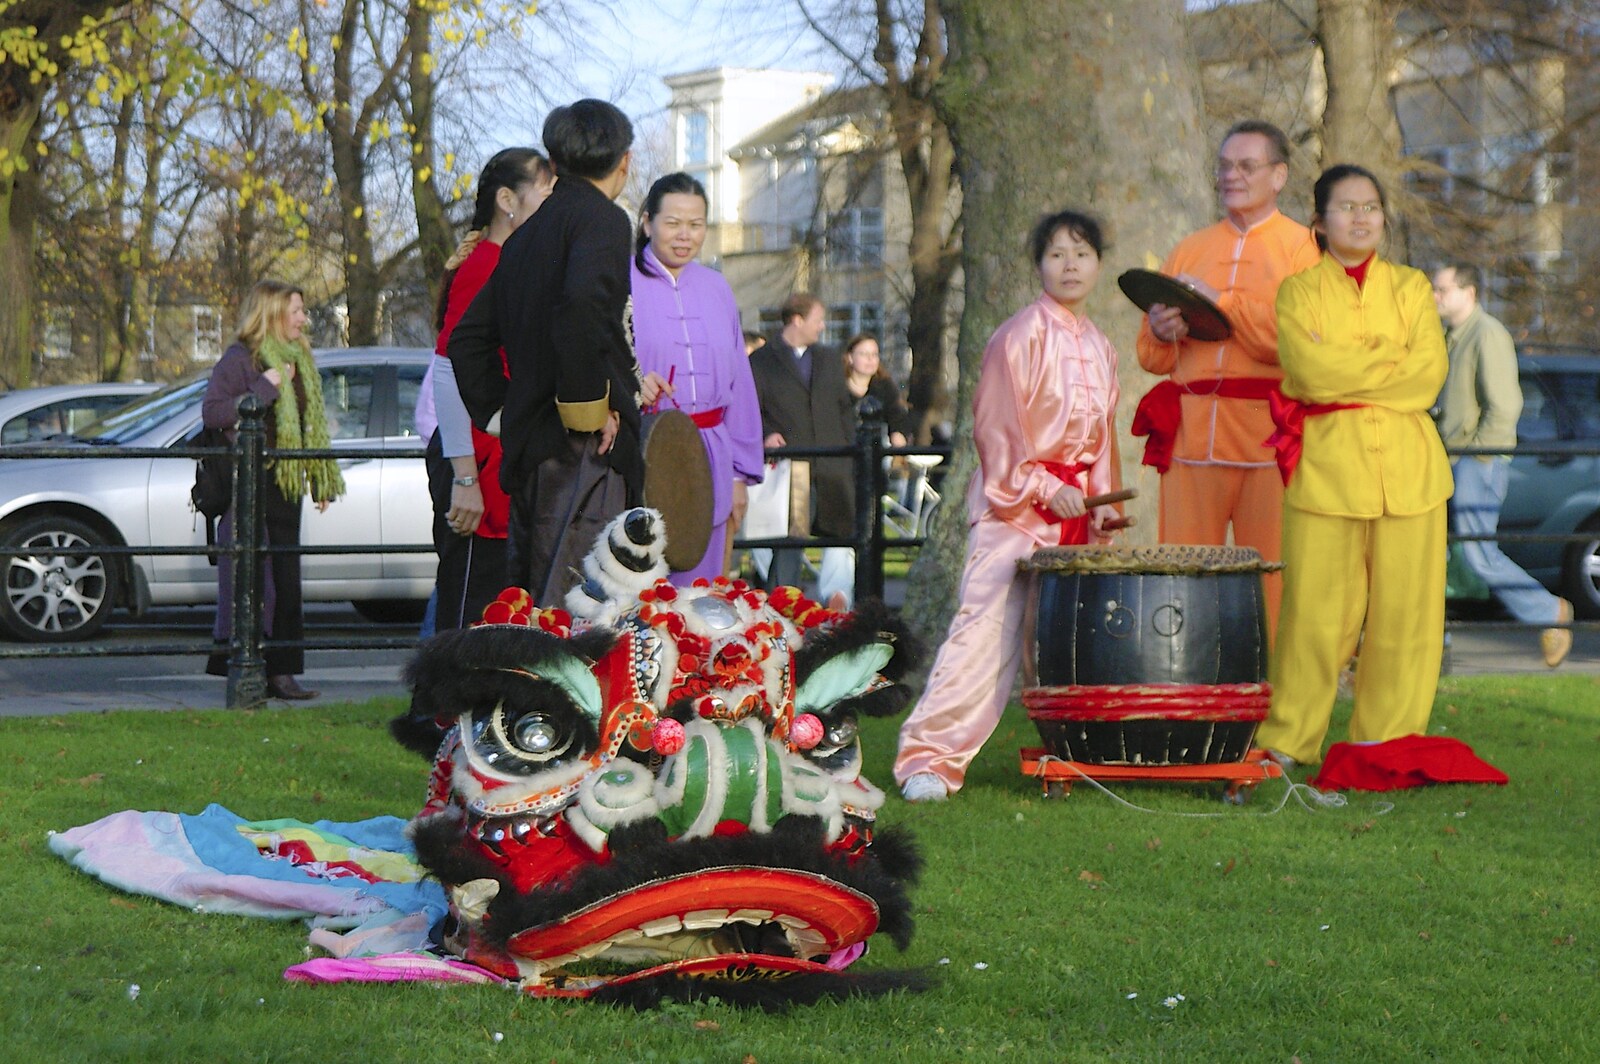 On Donkey Common, the Chinese dragon's head awaits from The Winter Fair, Mill Road, Cambridge - 2nd December 2006